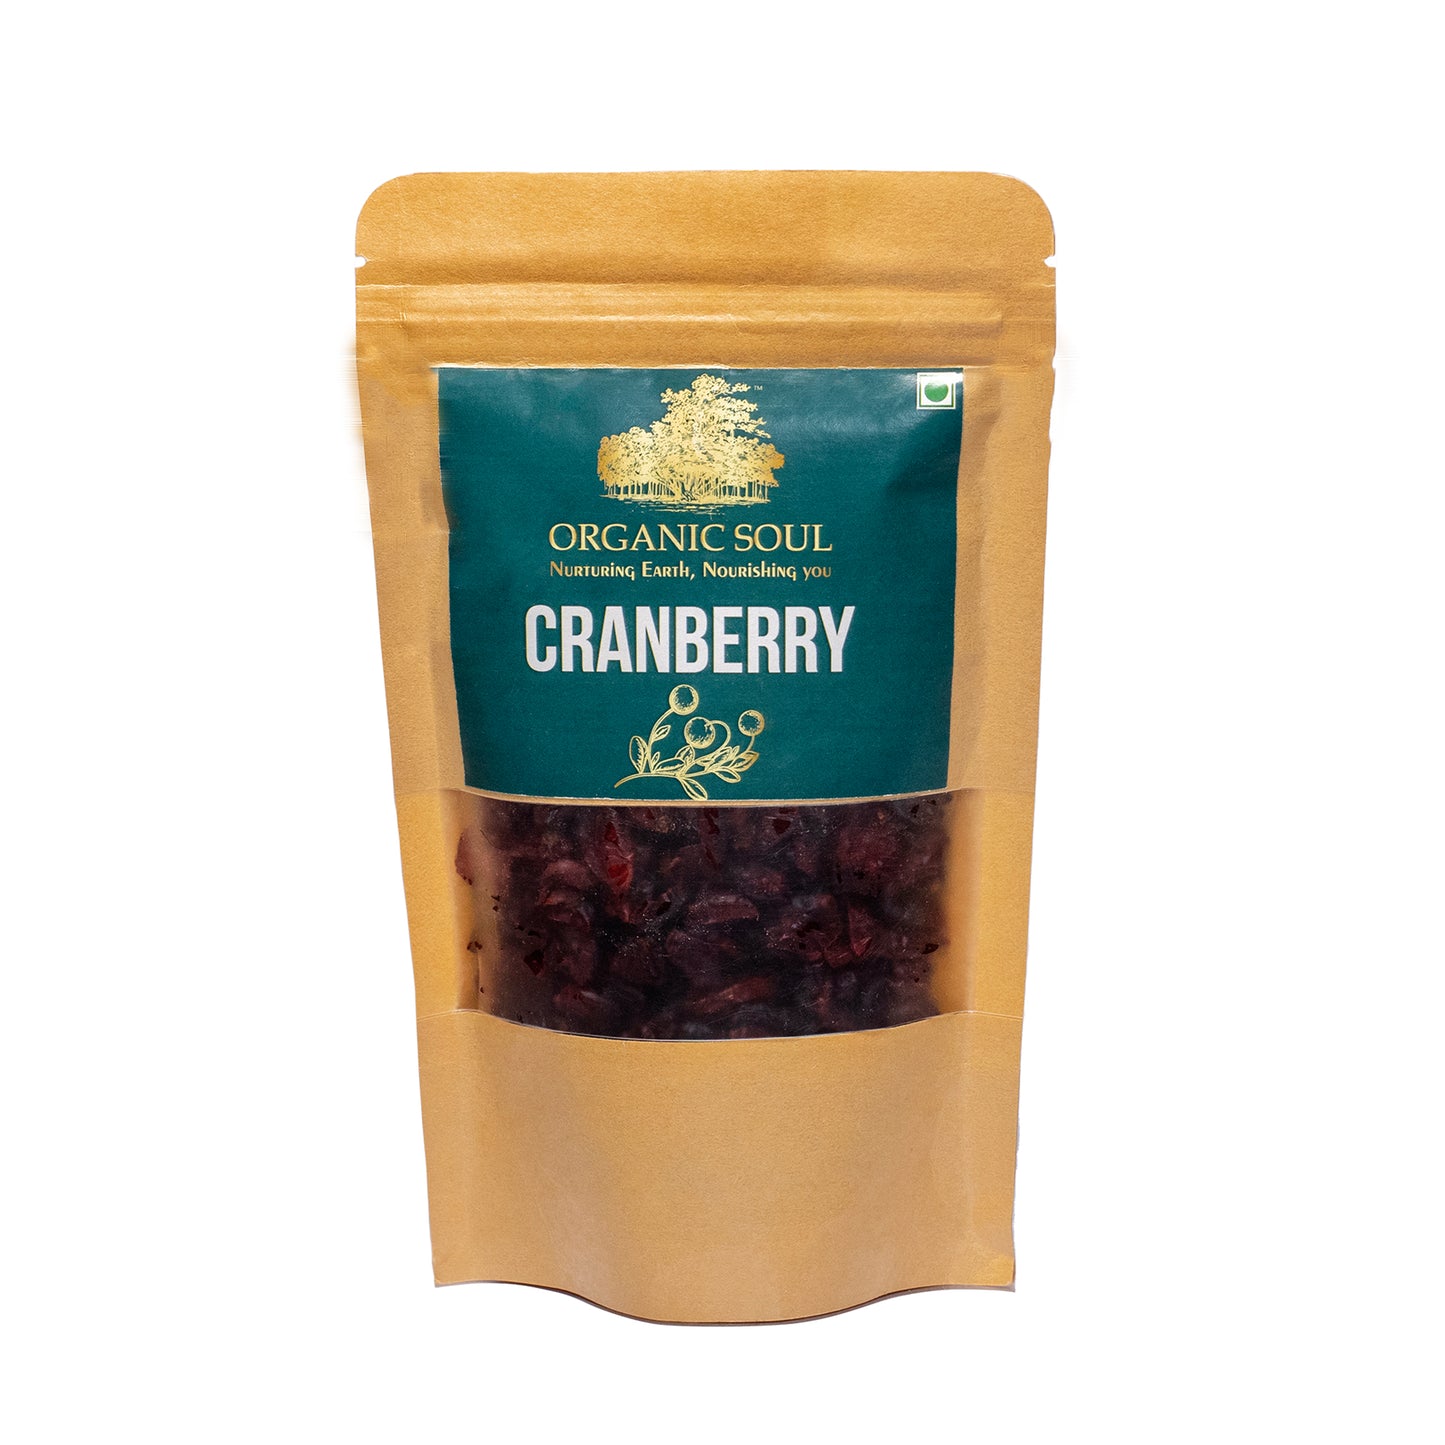 Organic Whole Cranberries - 200g | Cranberry Dry Fruit | Healthy Snack